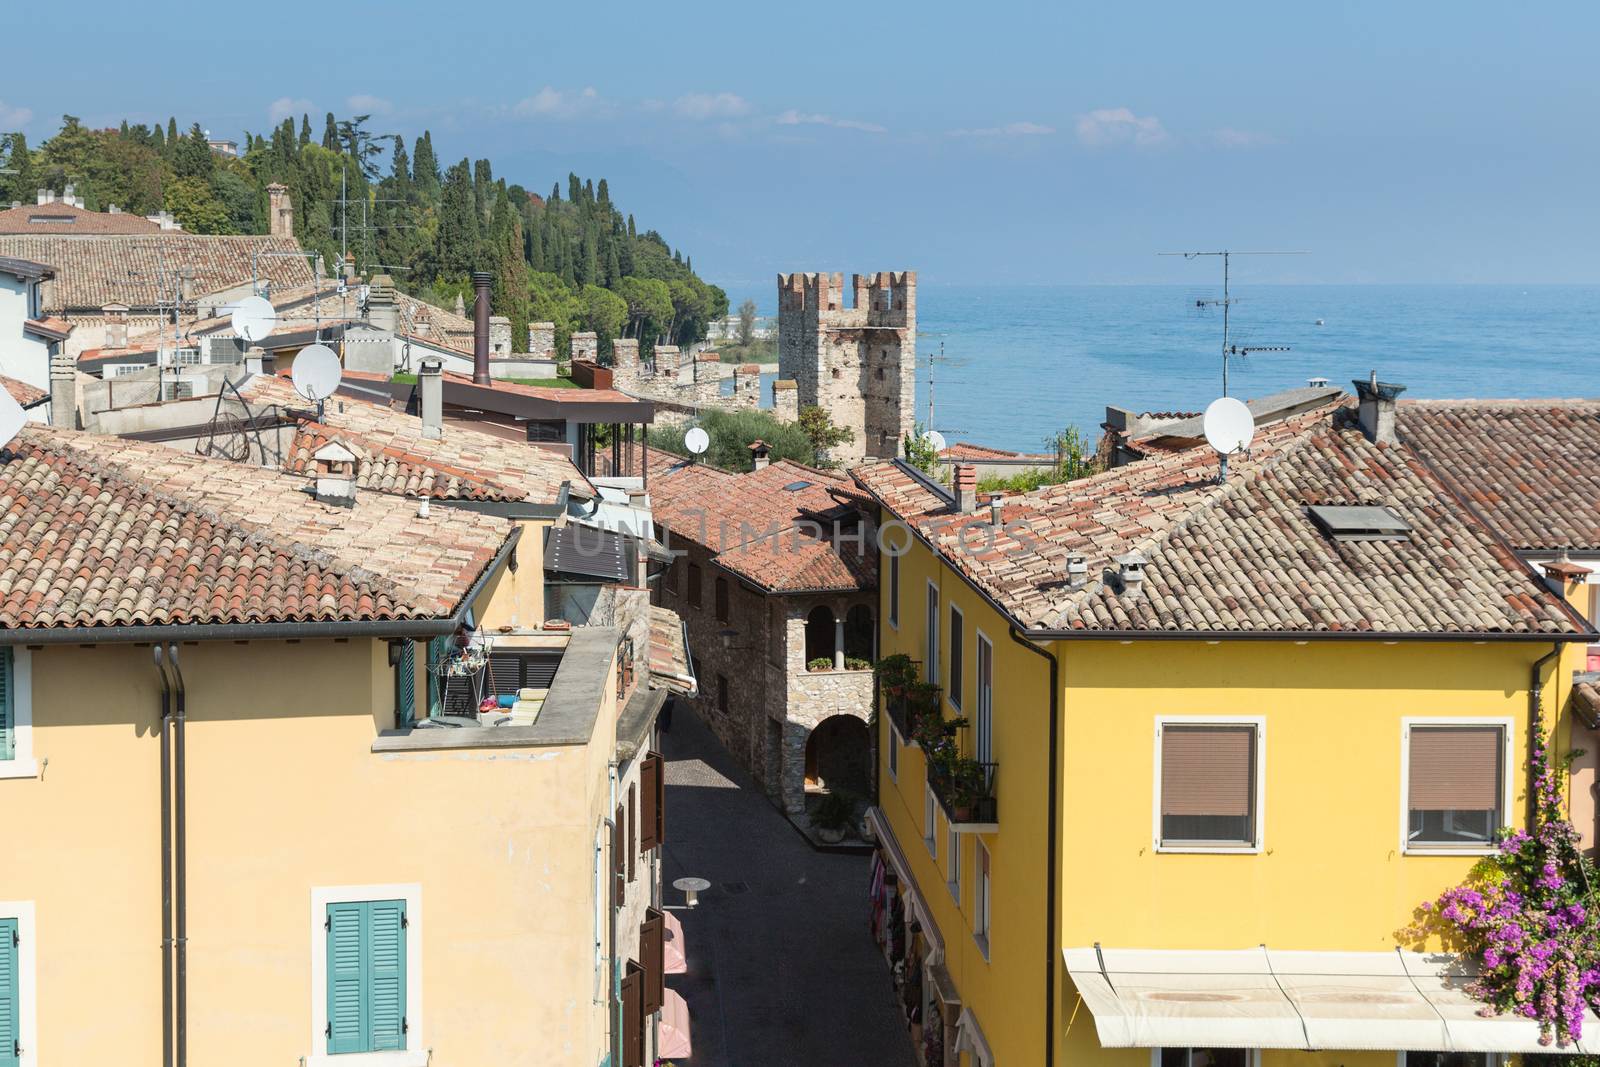 The view from Castello Scaligero in Sirmione on Lake Garda by chrisukphoto